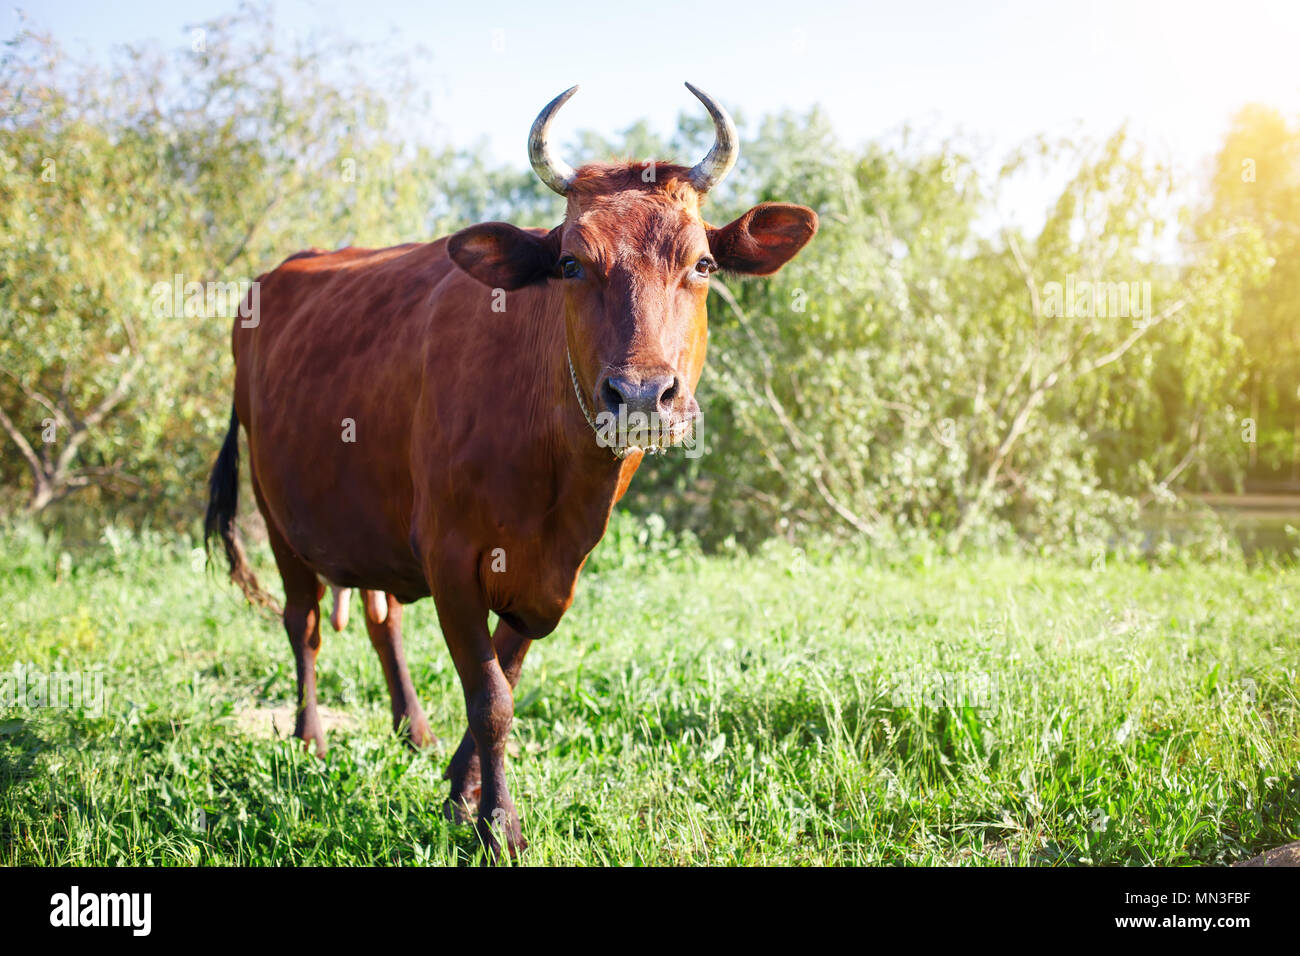 The cow is grazed on a pasture in the summer. Agriculture and livestock production. Stock Photo